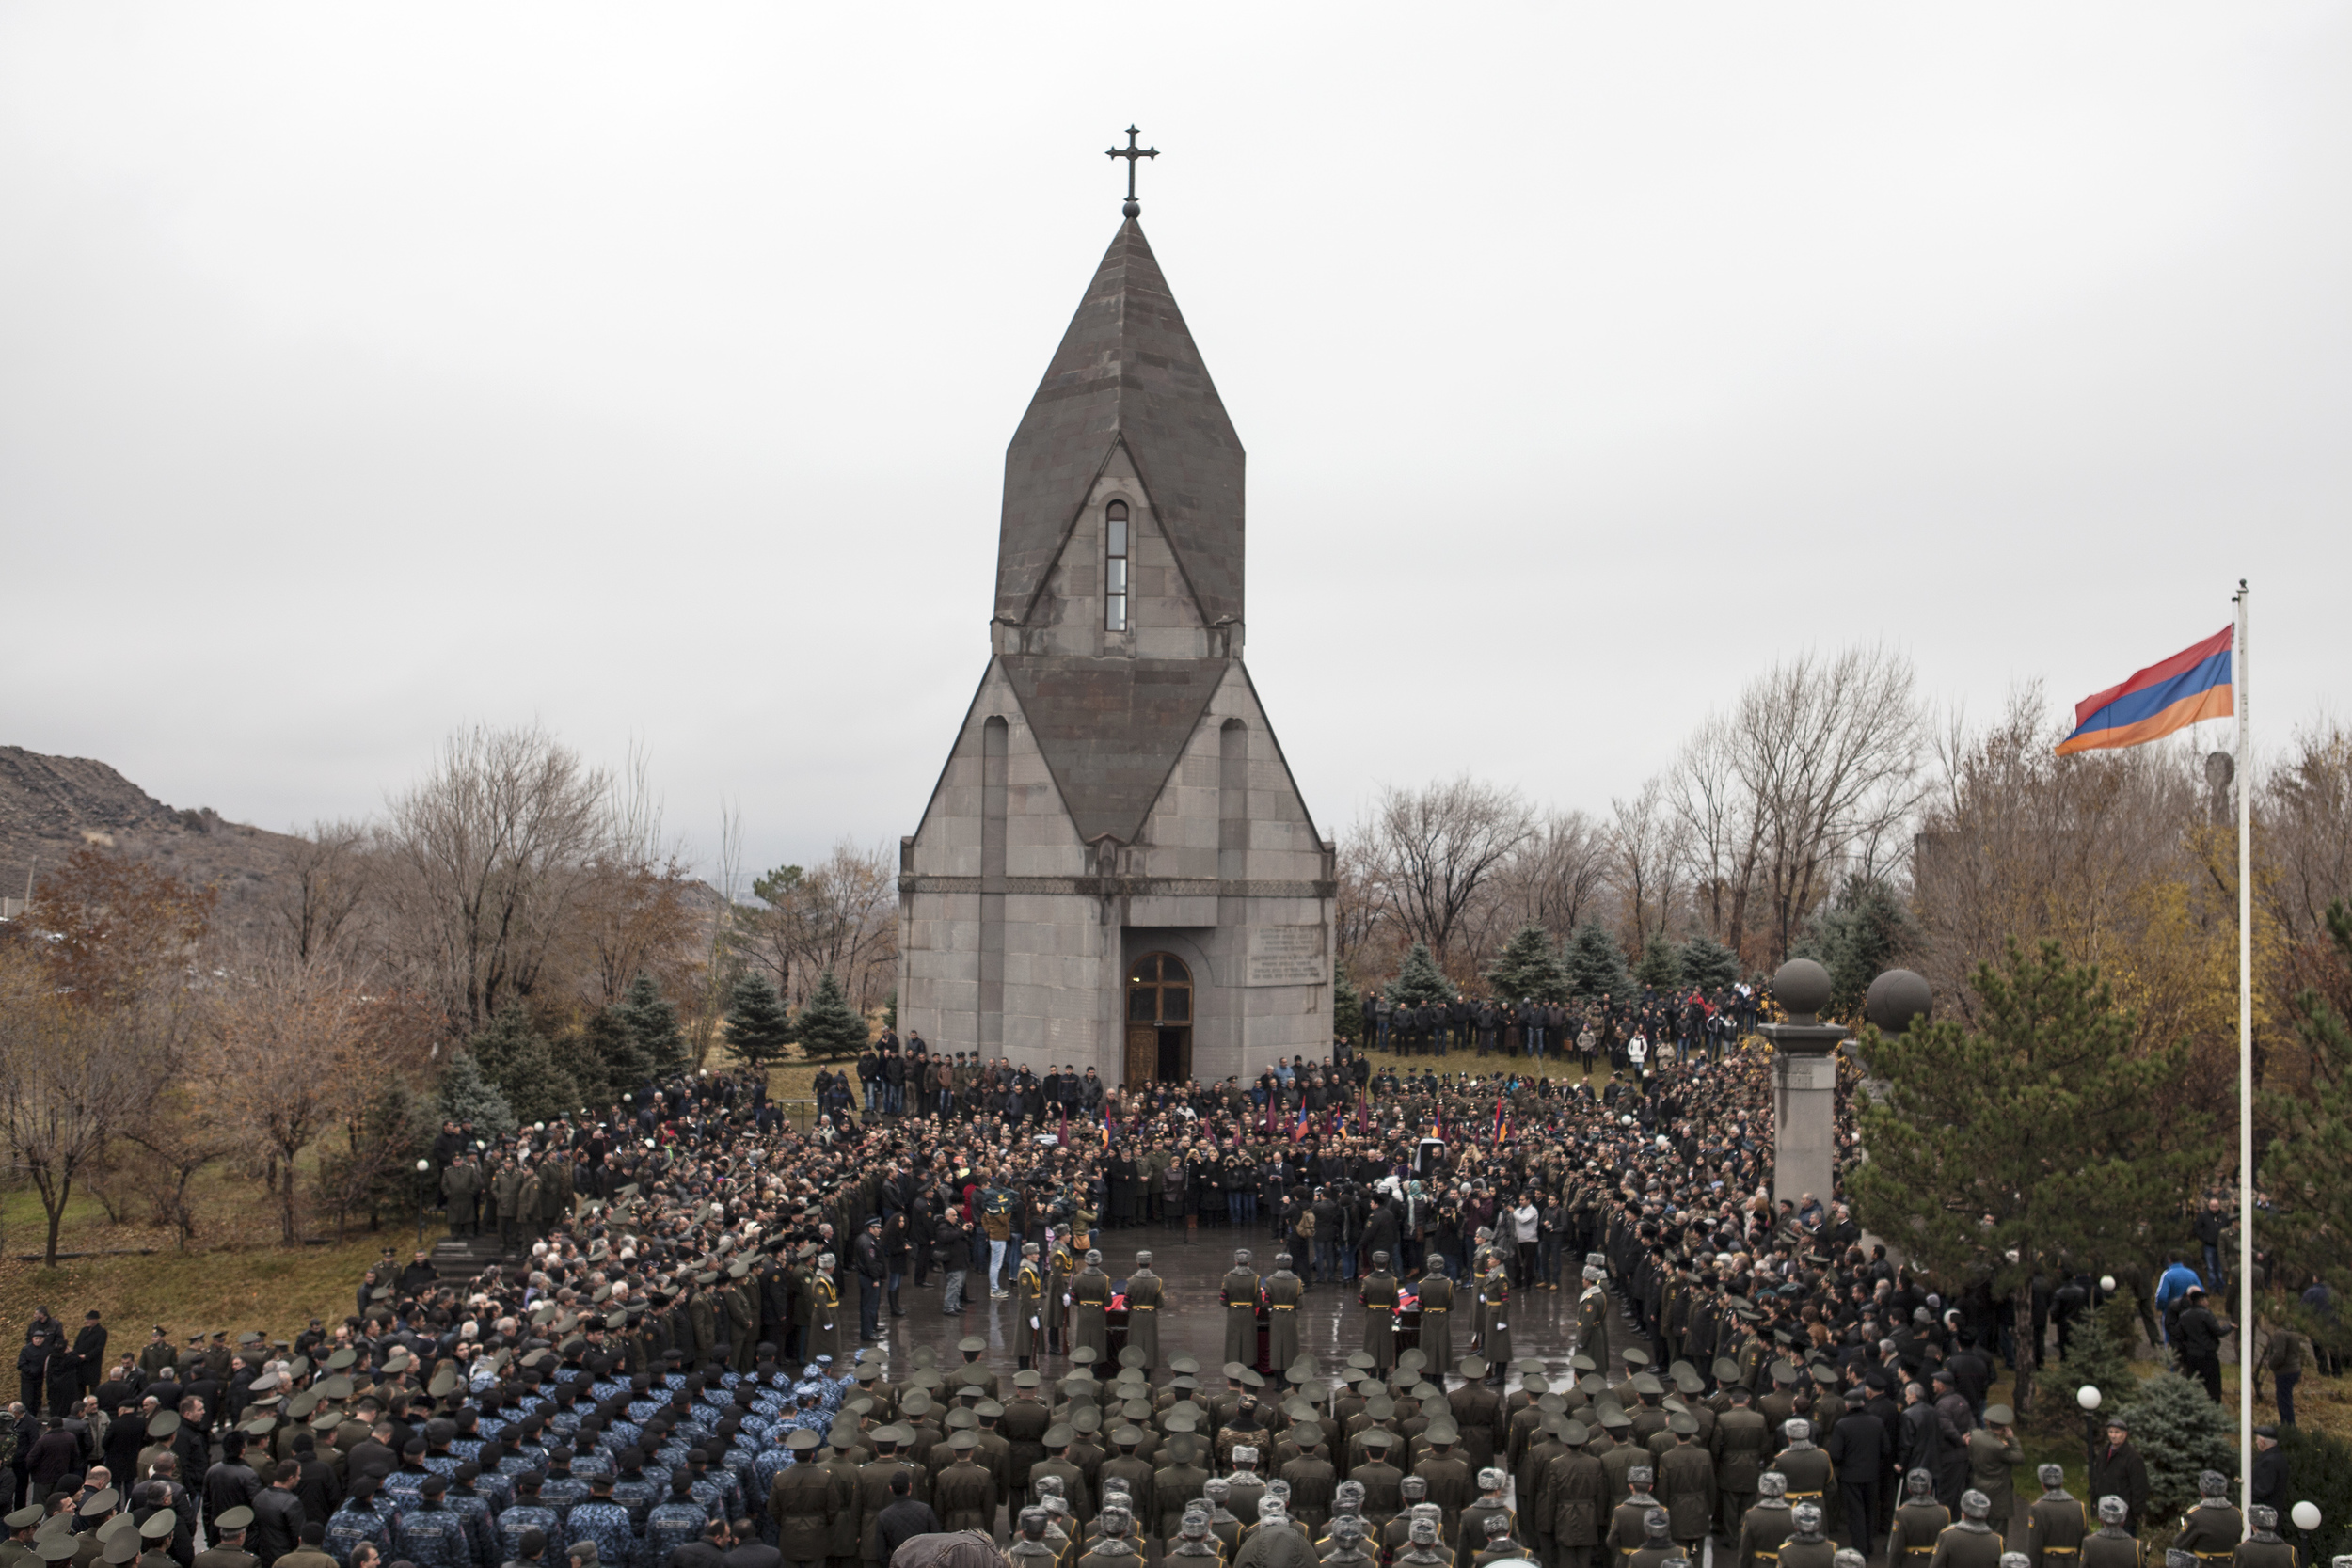   Yerevan, Armenia &nbsp;- On November 25, 2014 Armenia held funeral services for three of their soldiers killed when Azerbaijan shot down the helicopter they were flying in the disputed territory of Nagorno-Karabakh. 